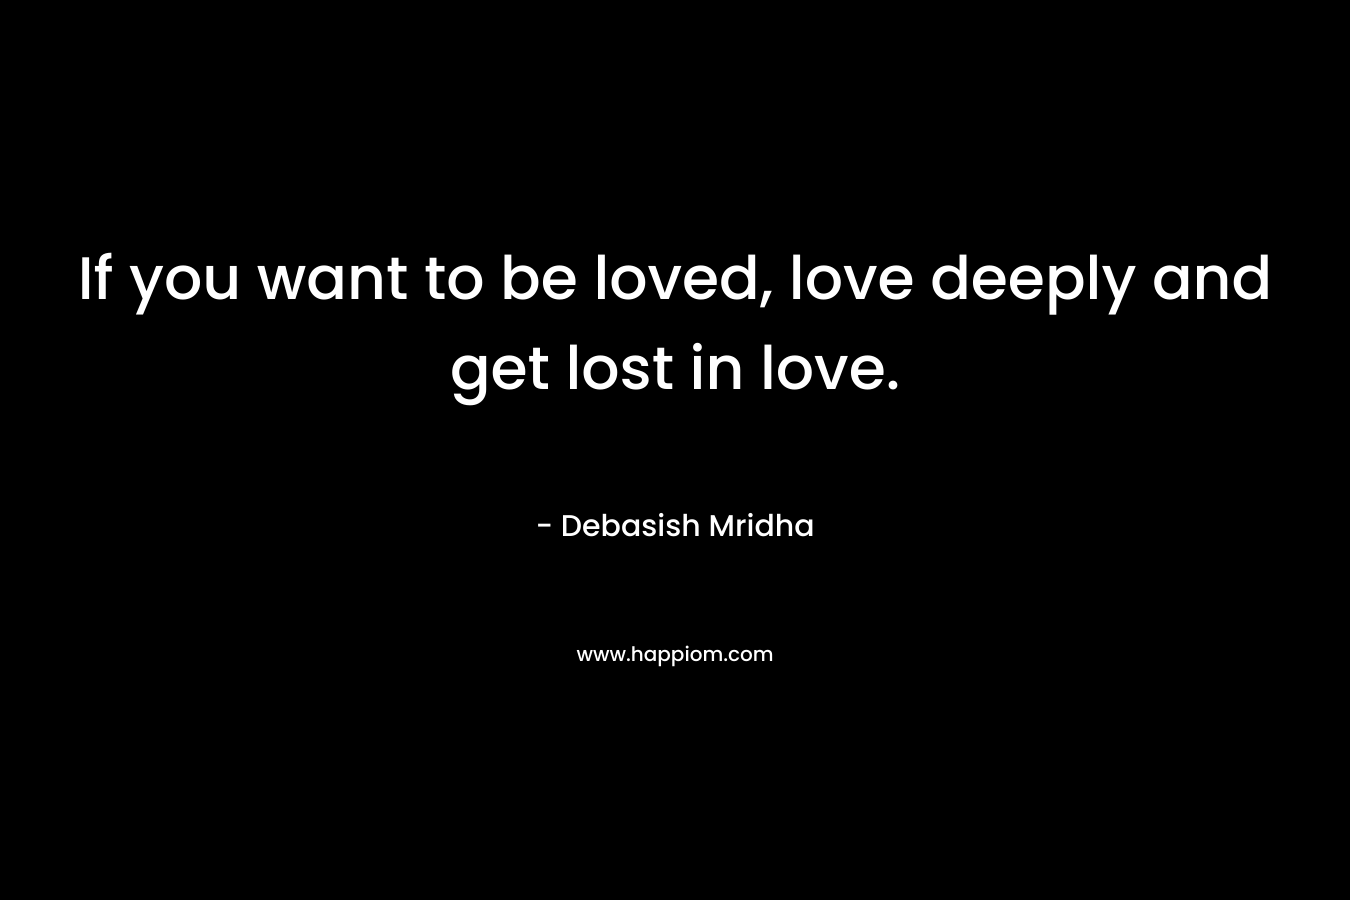 If you want to be loved, love deeply and get lost in love.